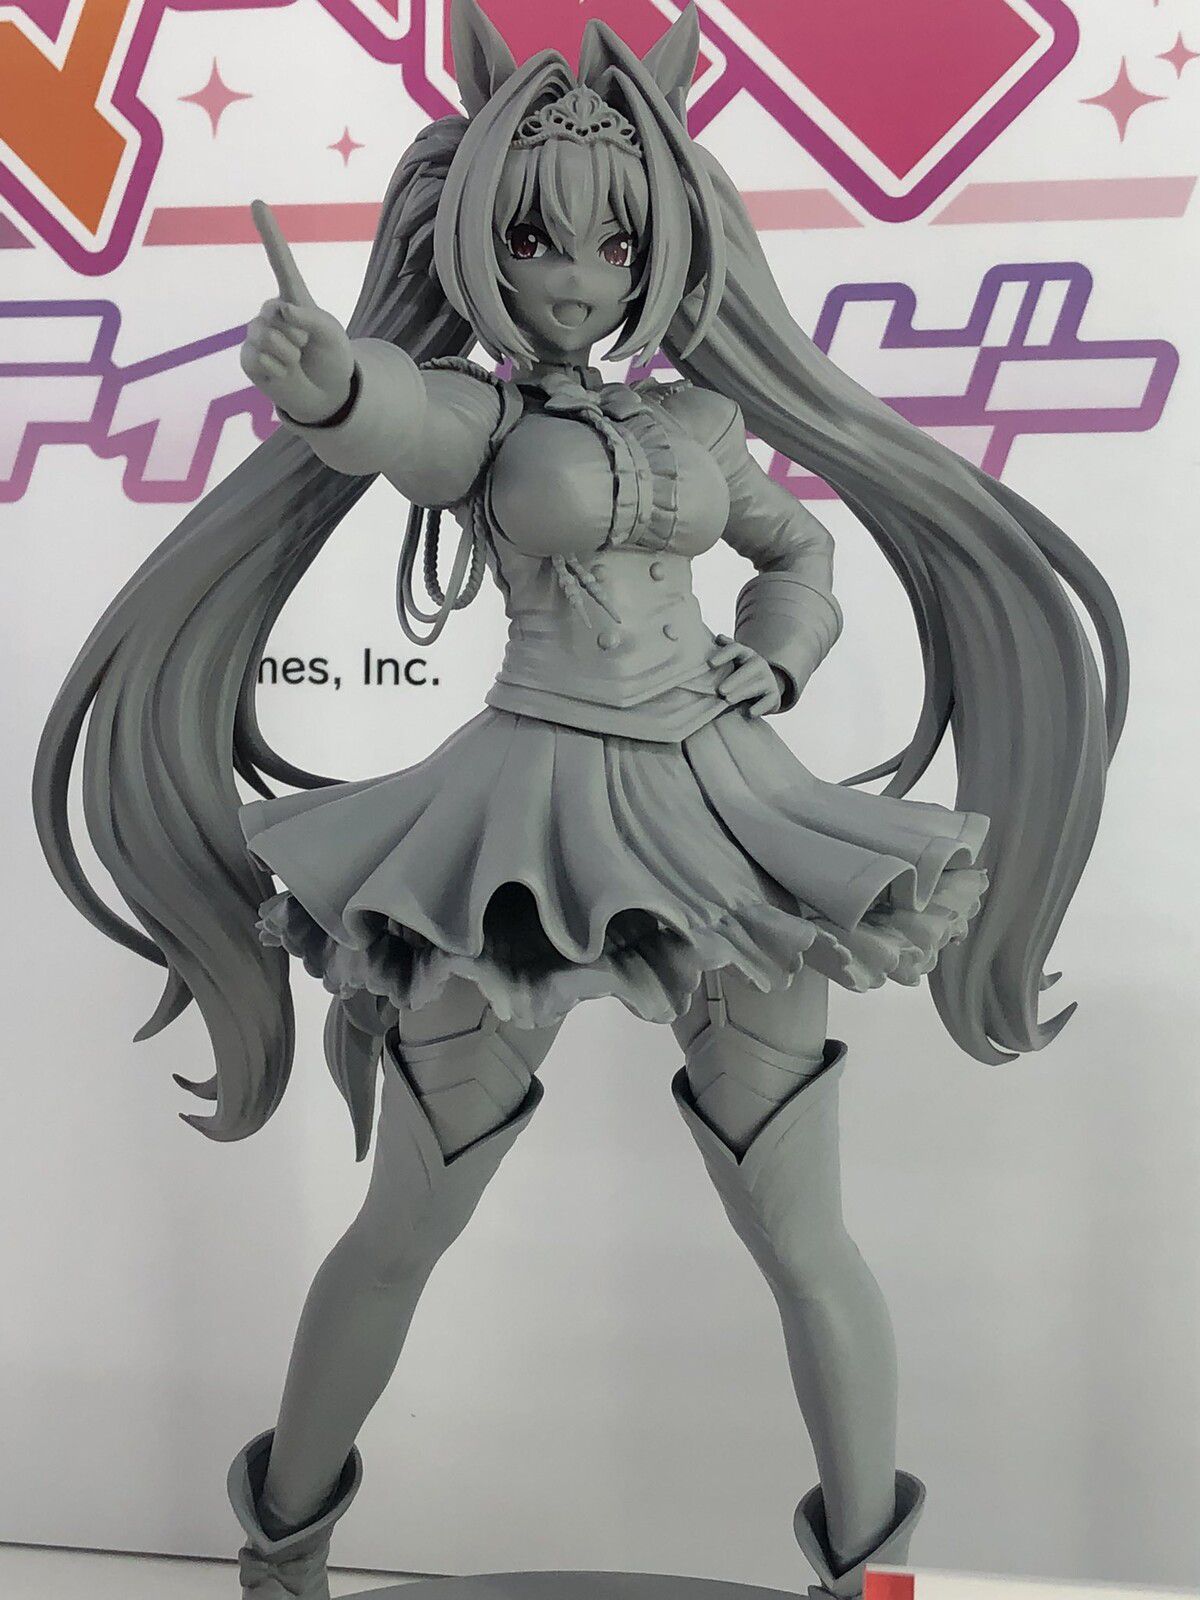 When I look at the prototype of the figure of [Uma Musume] Daiwa Scarlet from below, the thighs and spats are too erotic 8